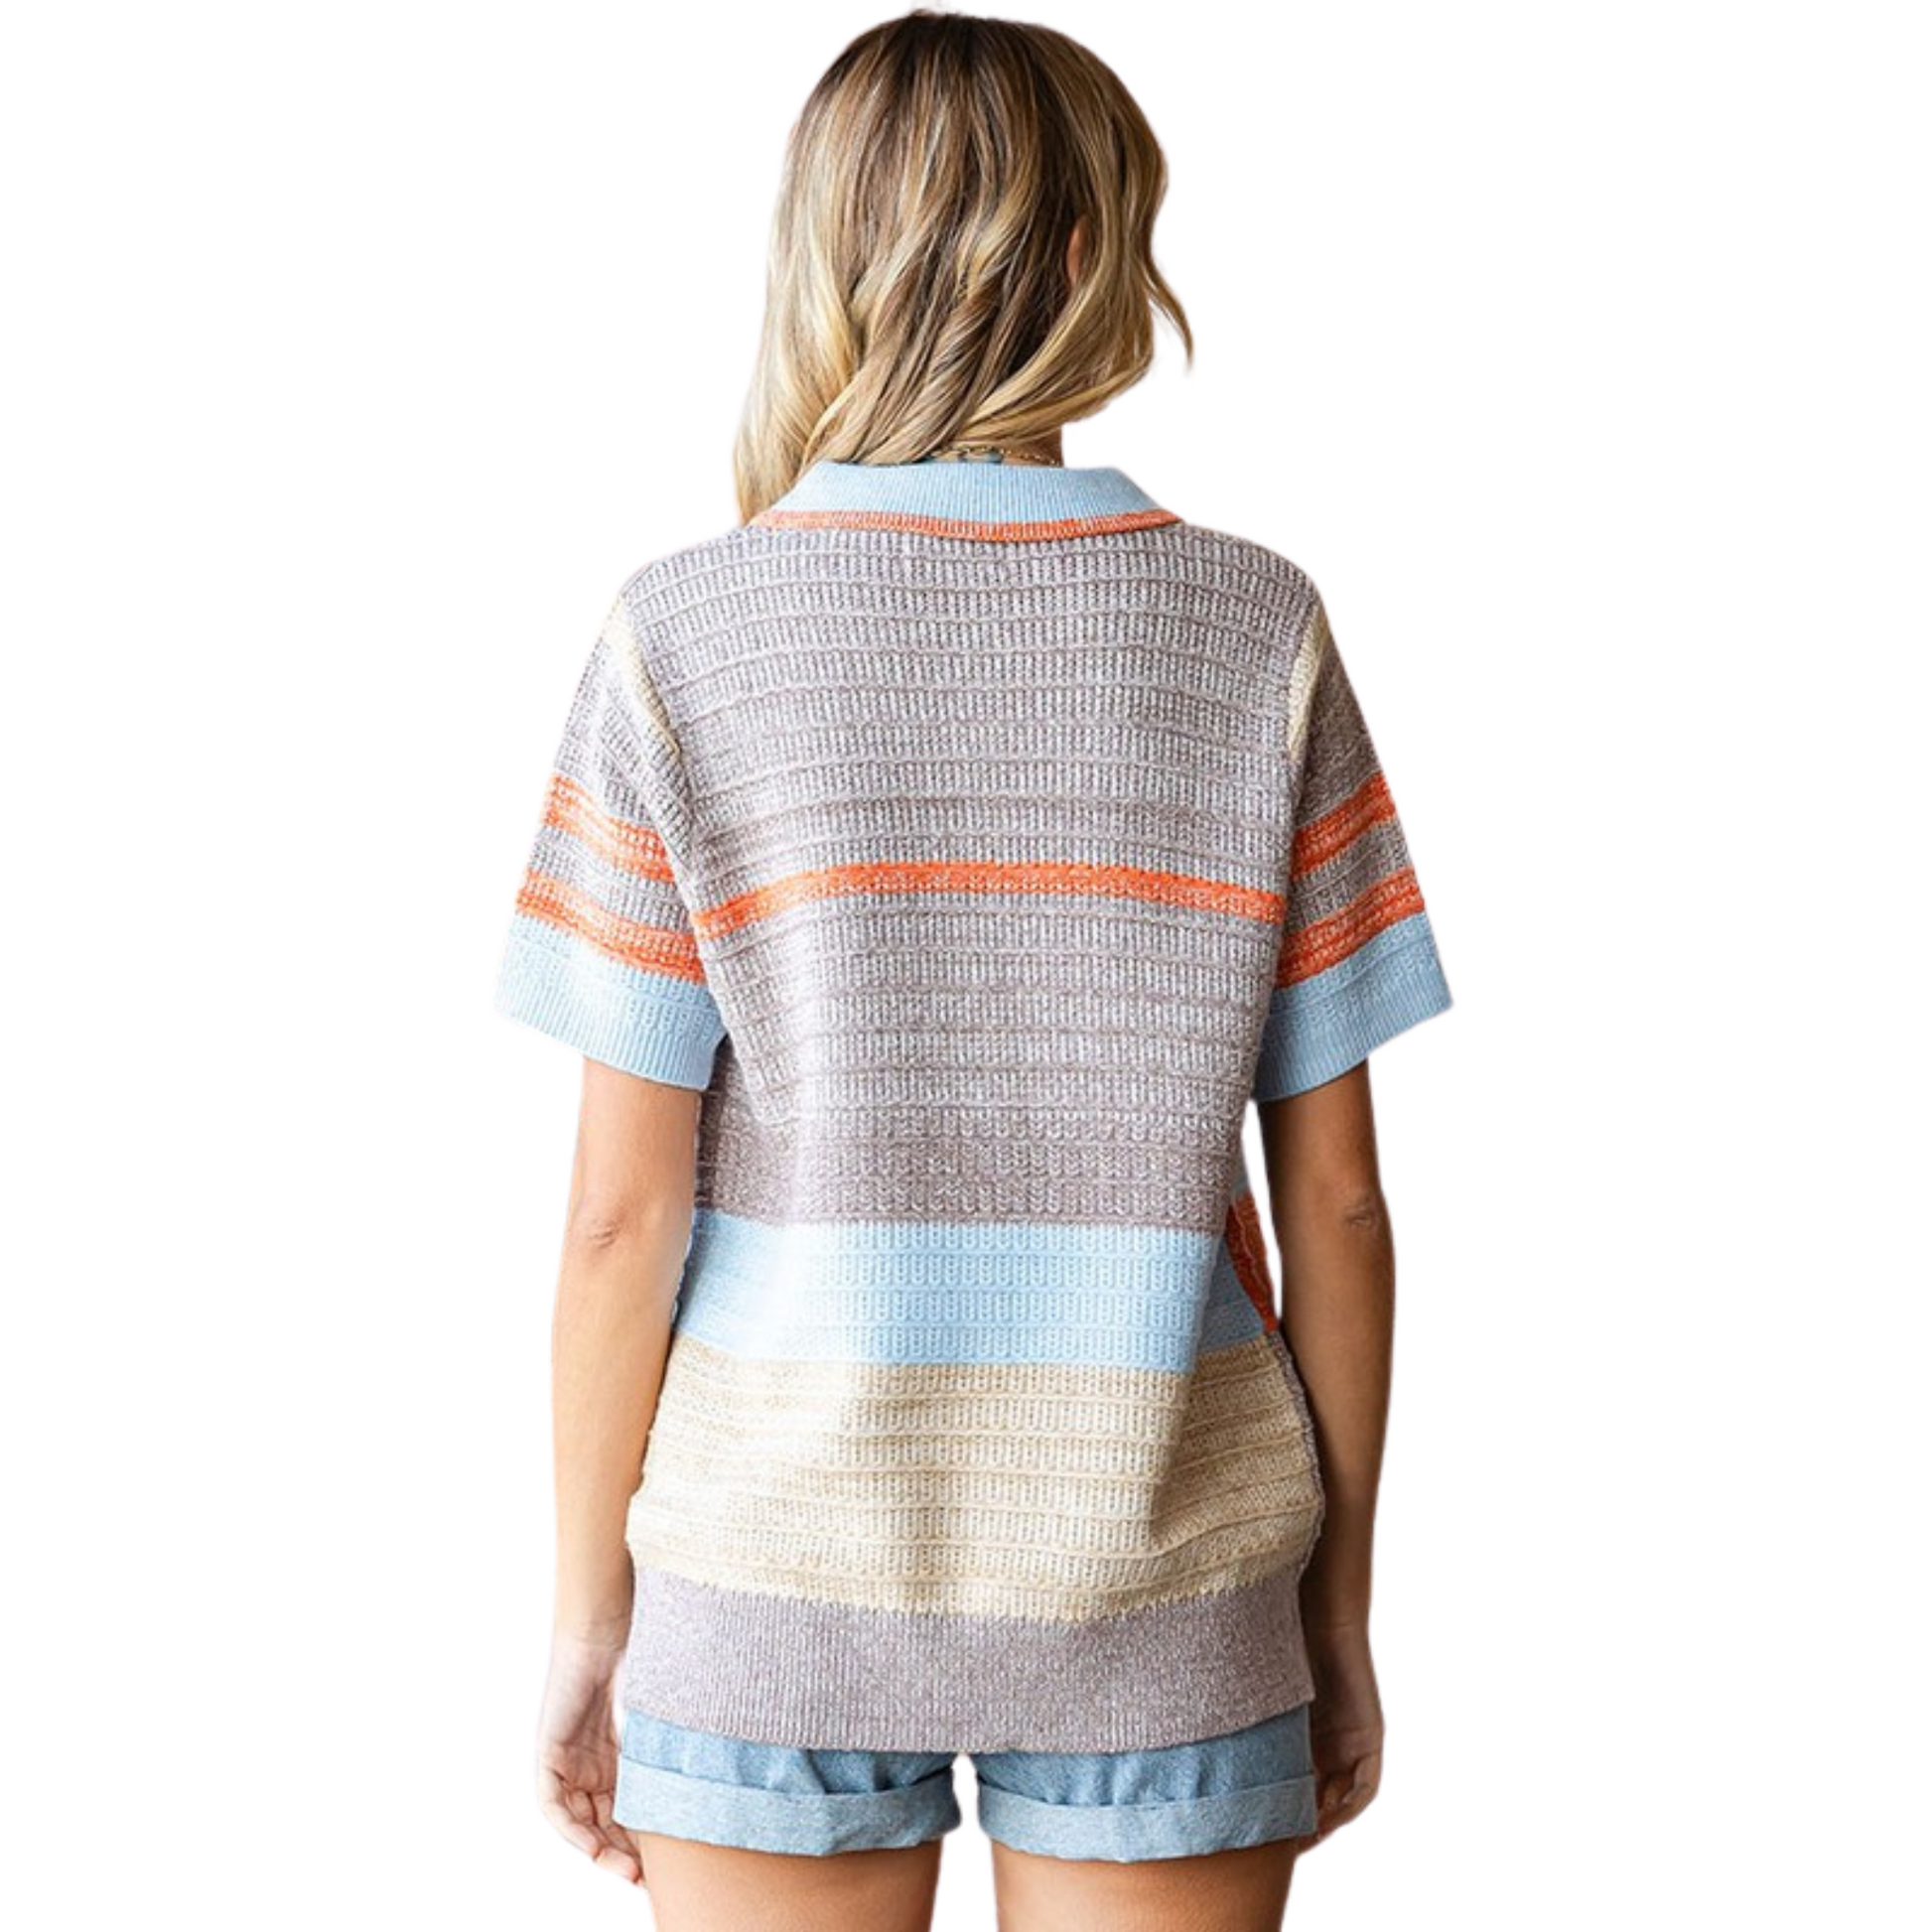 Add a pop of color to your wardrobe with our Multicolor Short Sleeve Sweater. This knit sweater features a collared split neckline, ribbed cuffed short sleeves, and a ribbed hemline. The blue multicolor design is both eye-catching and versatile, making it a perfect addition to any outfit.